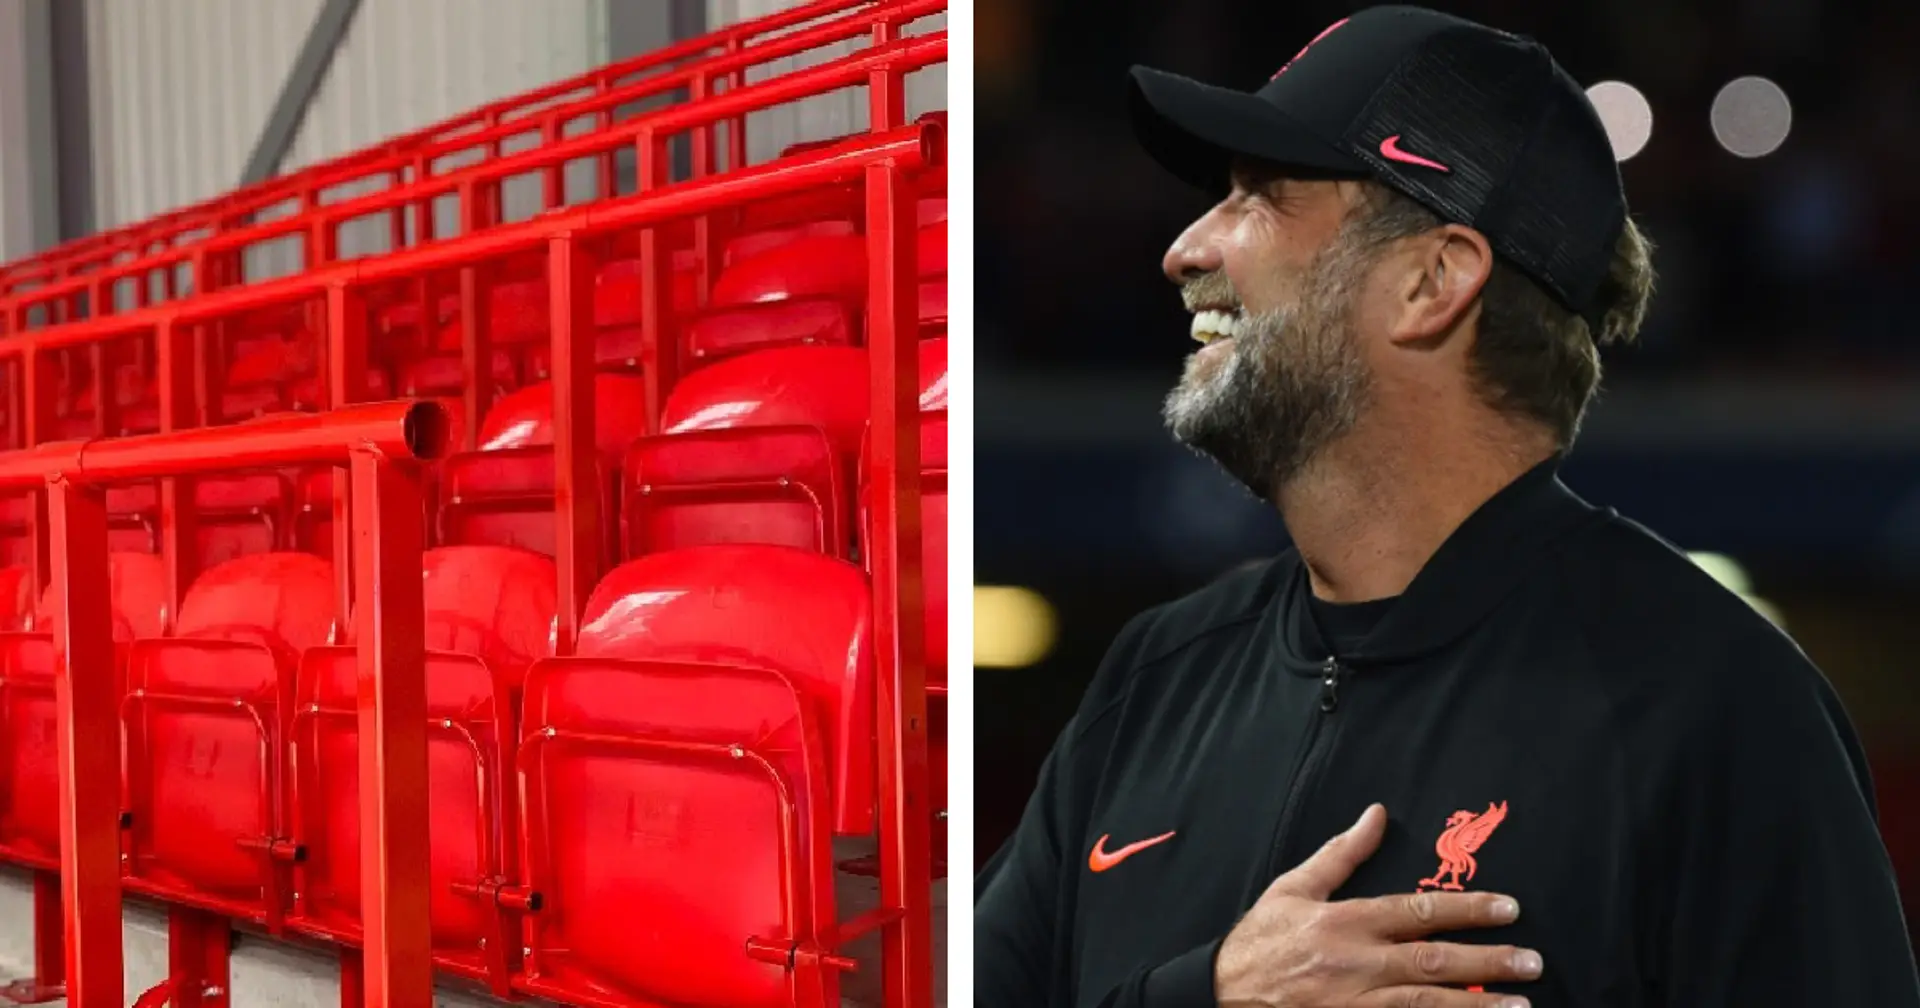 'I'm open to seeing how much better Anfield atmosphere can get': Klopp's view on safe standing